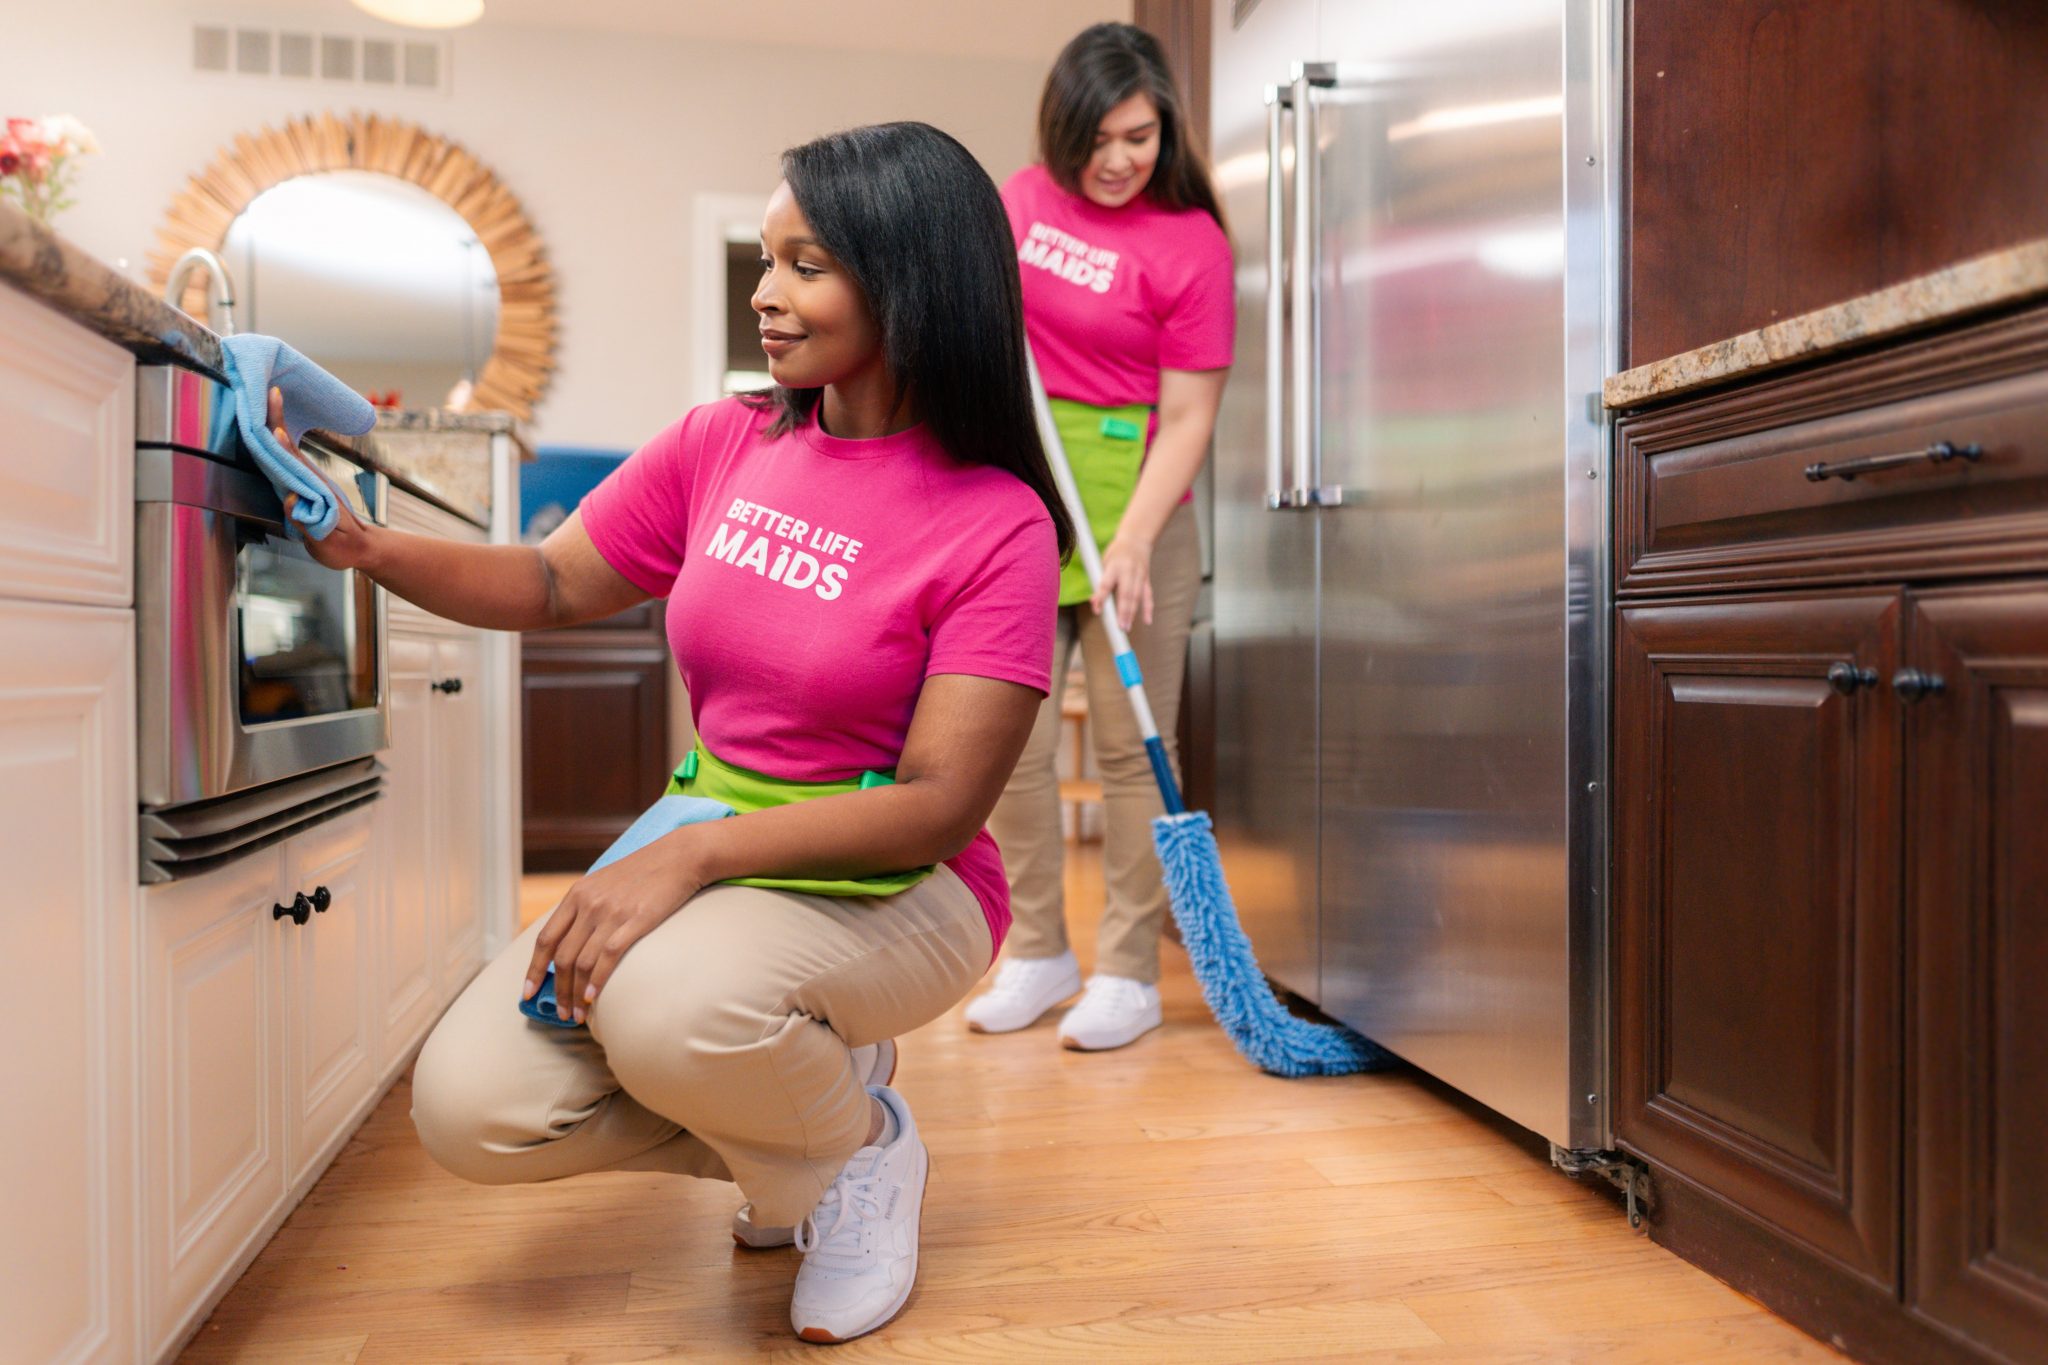 better life maids, house cleaning in town and country, house cleaning near me, house cleaning near town and country, best maids in town and country, best maid service near me, top quality maids, residential cleaner, move out maids town and country, green cleaning, eco cleaning